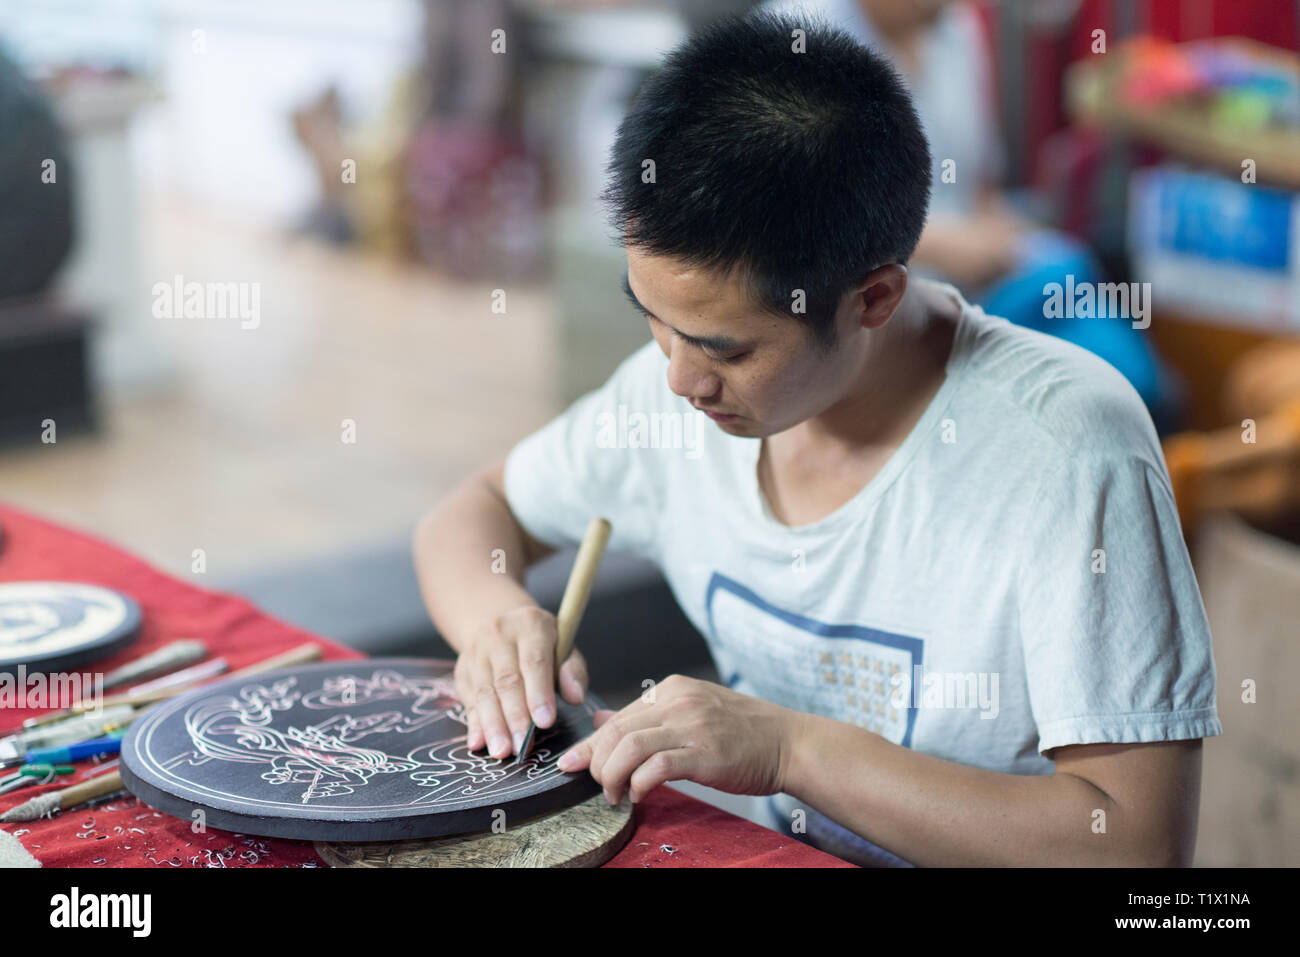 Dunhuang, China - 08 06 2016: A craftsman depicts Dunhuang culture through wood carvings. A chinese artist carving figures into a round of wood Stock Photo